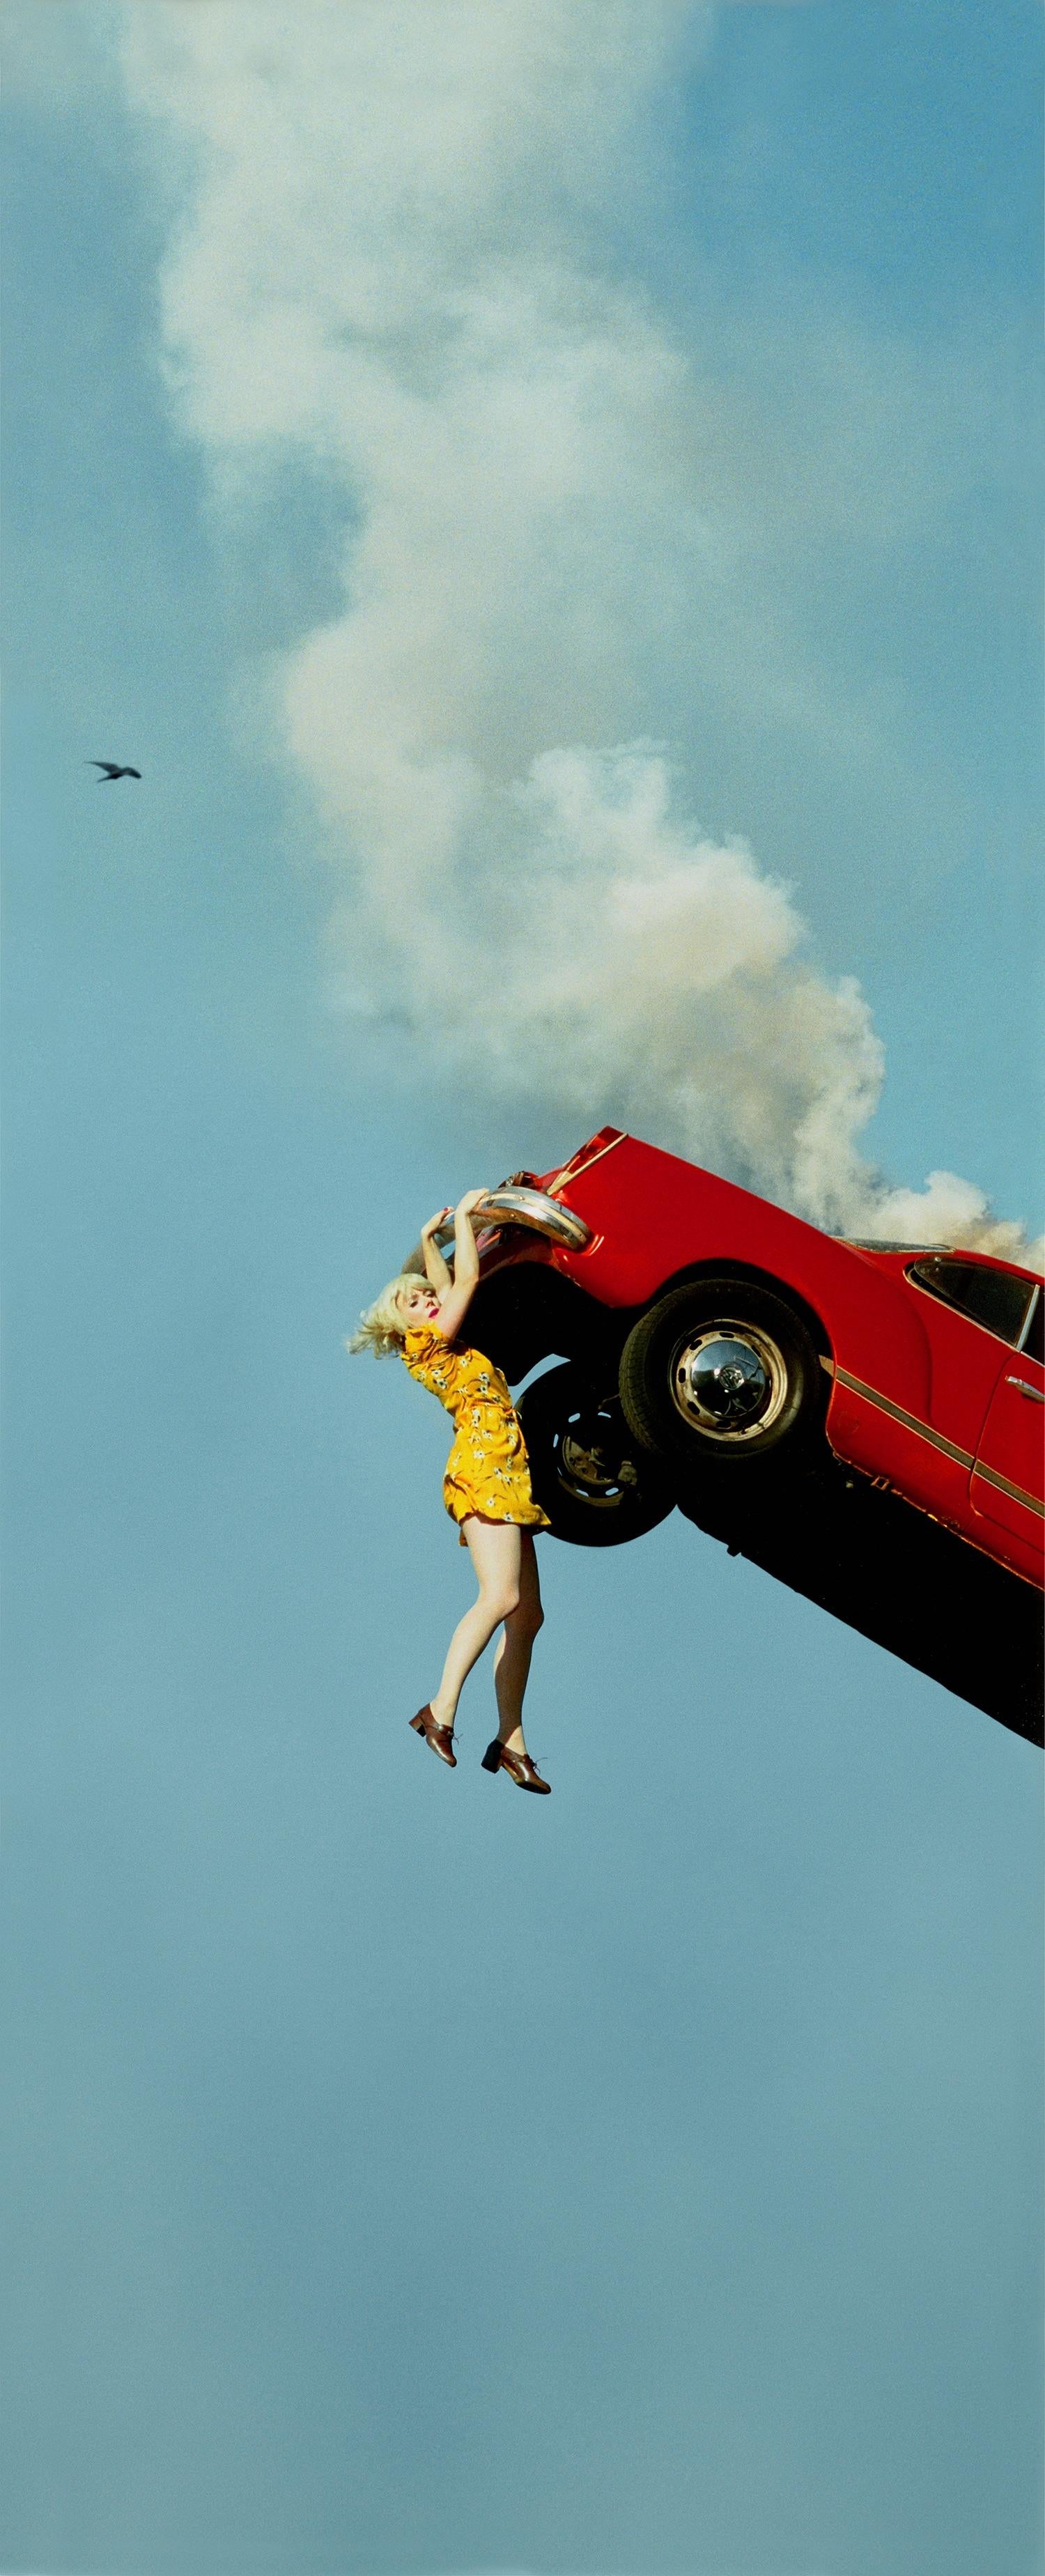 3:32 pm, Coldwater Canyon and Eye #5 (Automobile Accident) from Compulsion - Contemporary Photograph by Alex Prager